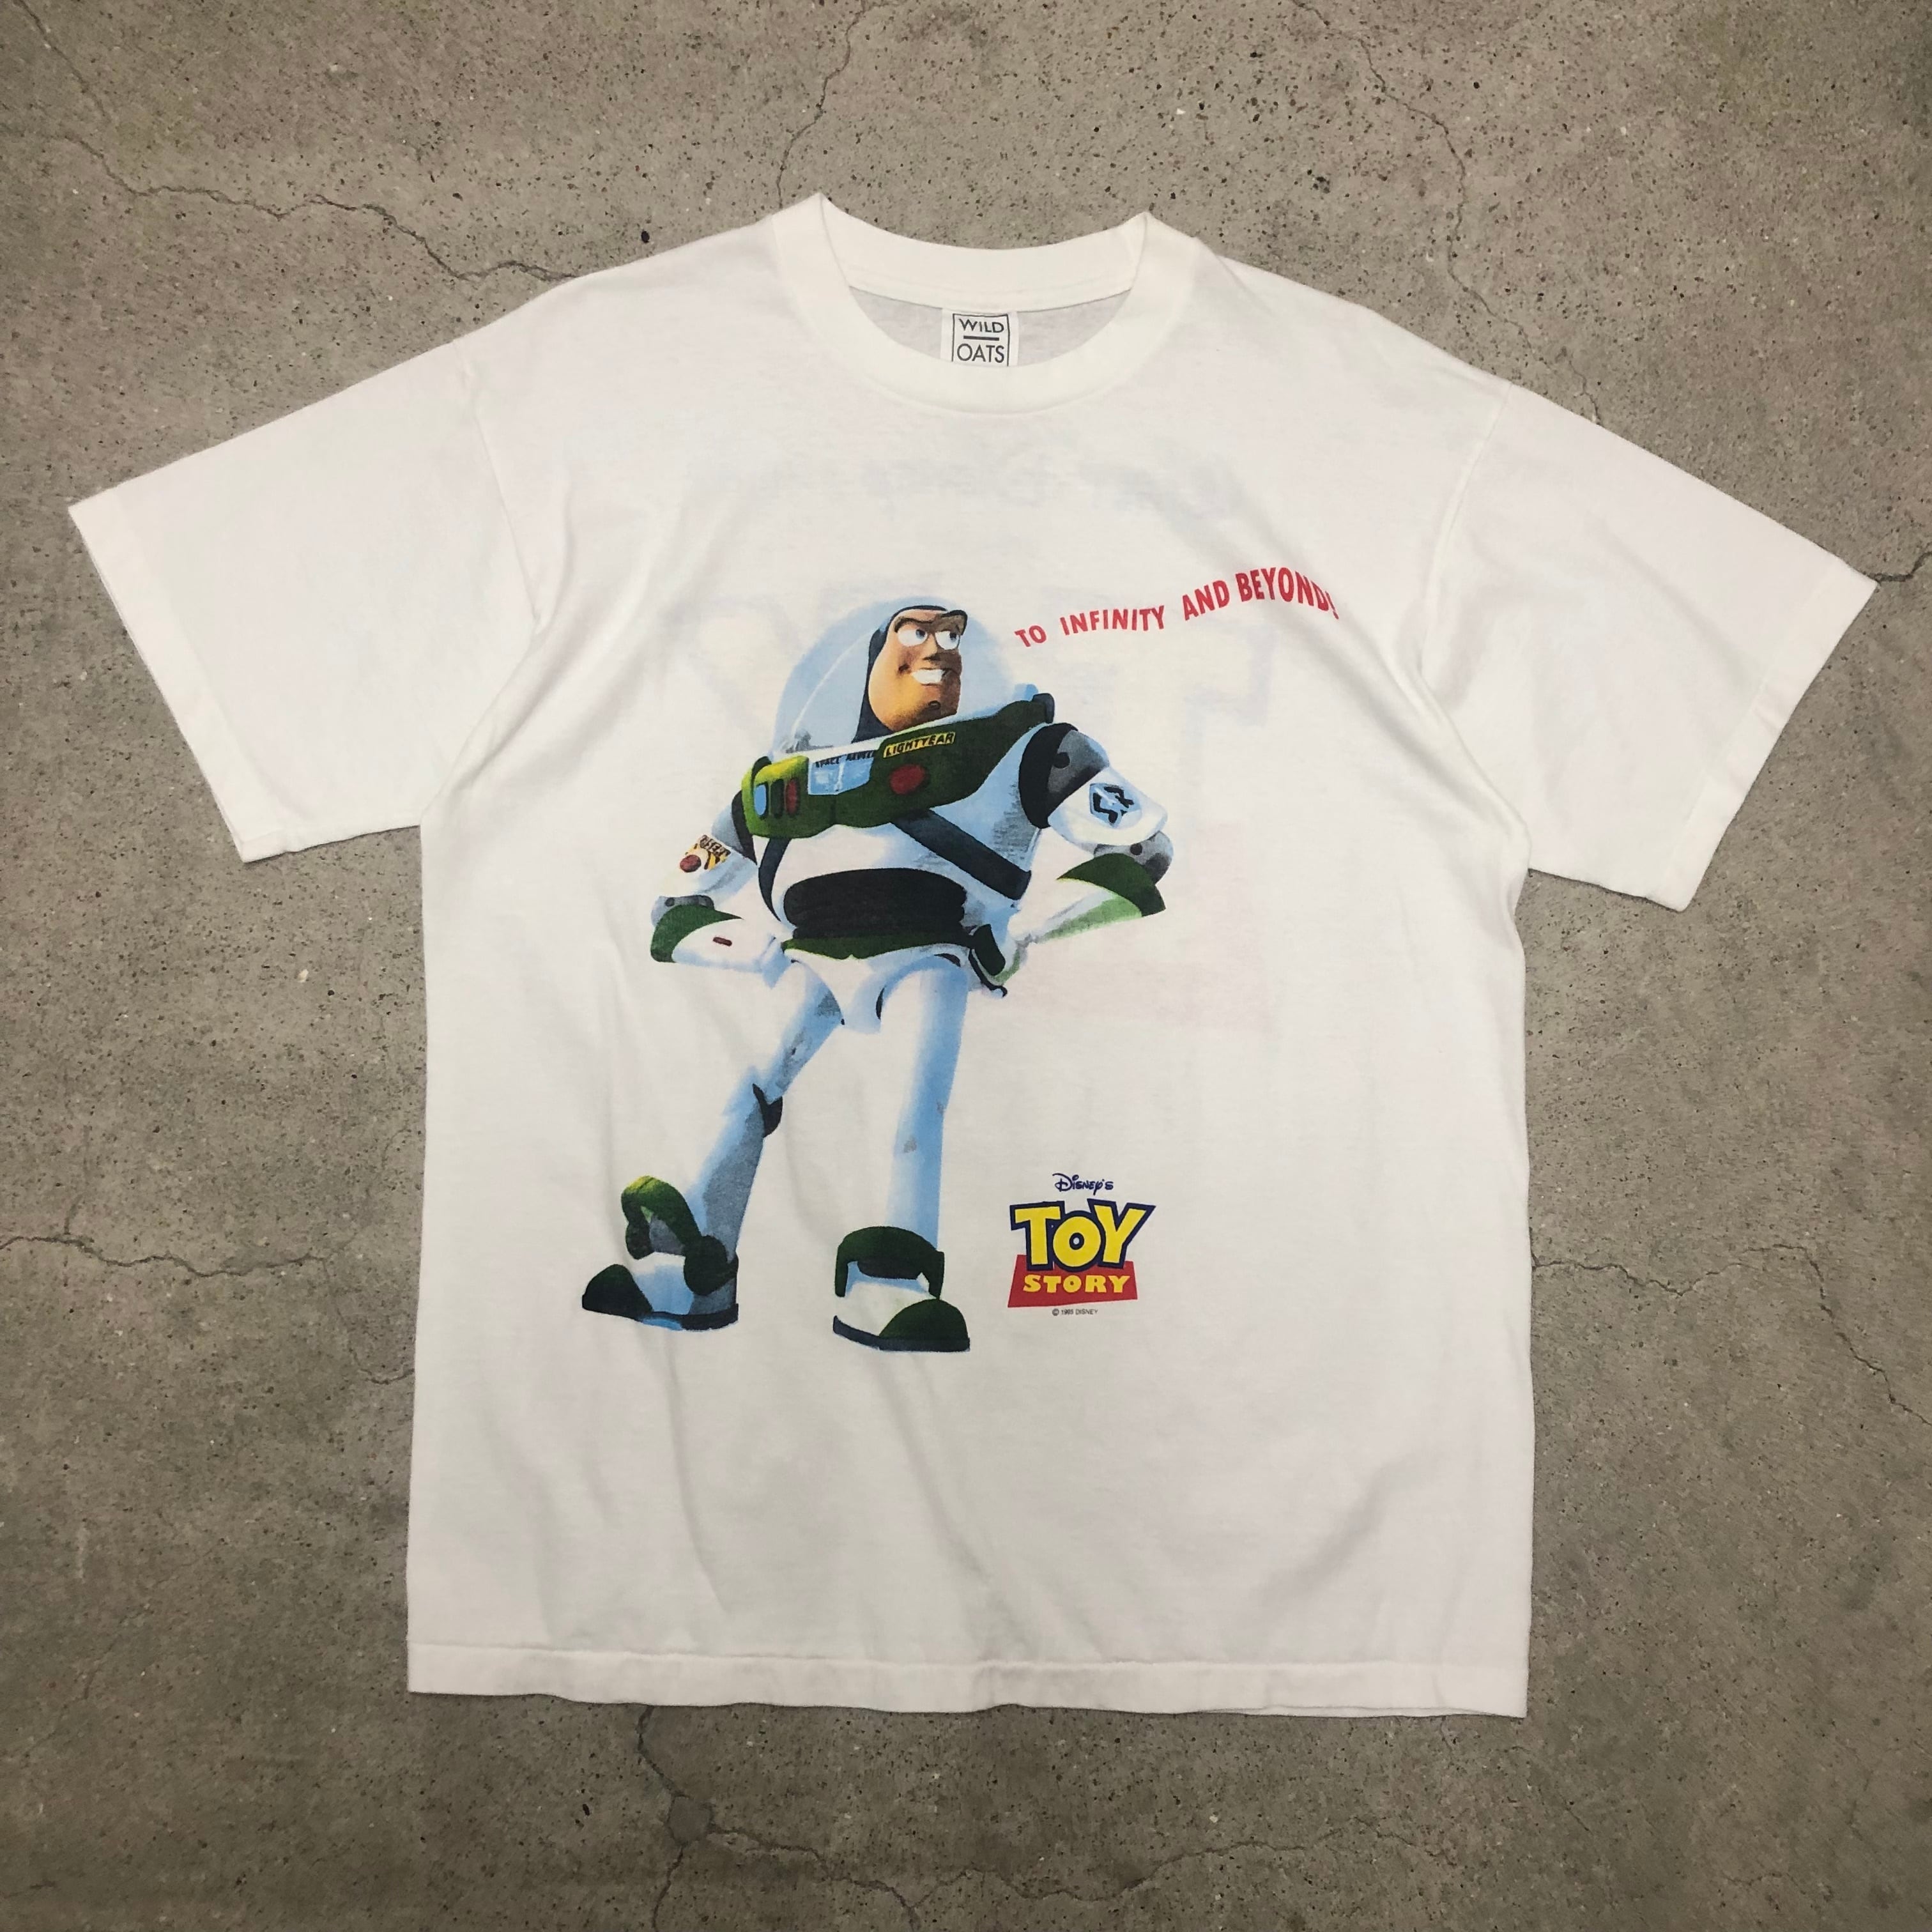 TOY STORY/BUZZ LIGHTYEAR Tee/USA製/L/WILD OATS/バズライトイヤー/T